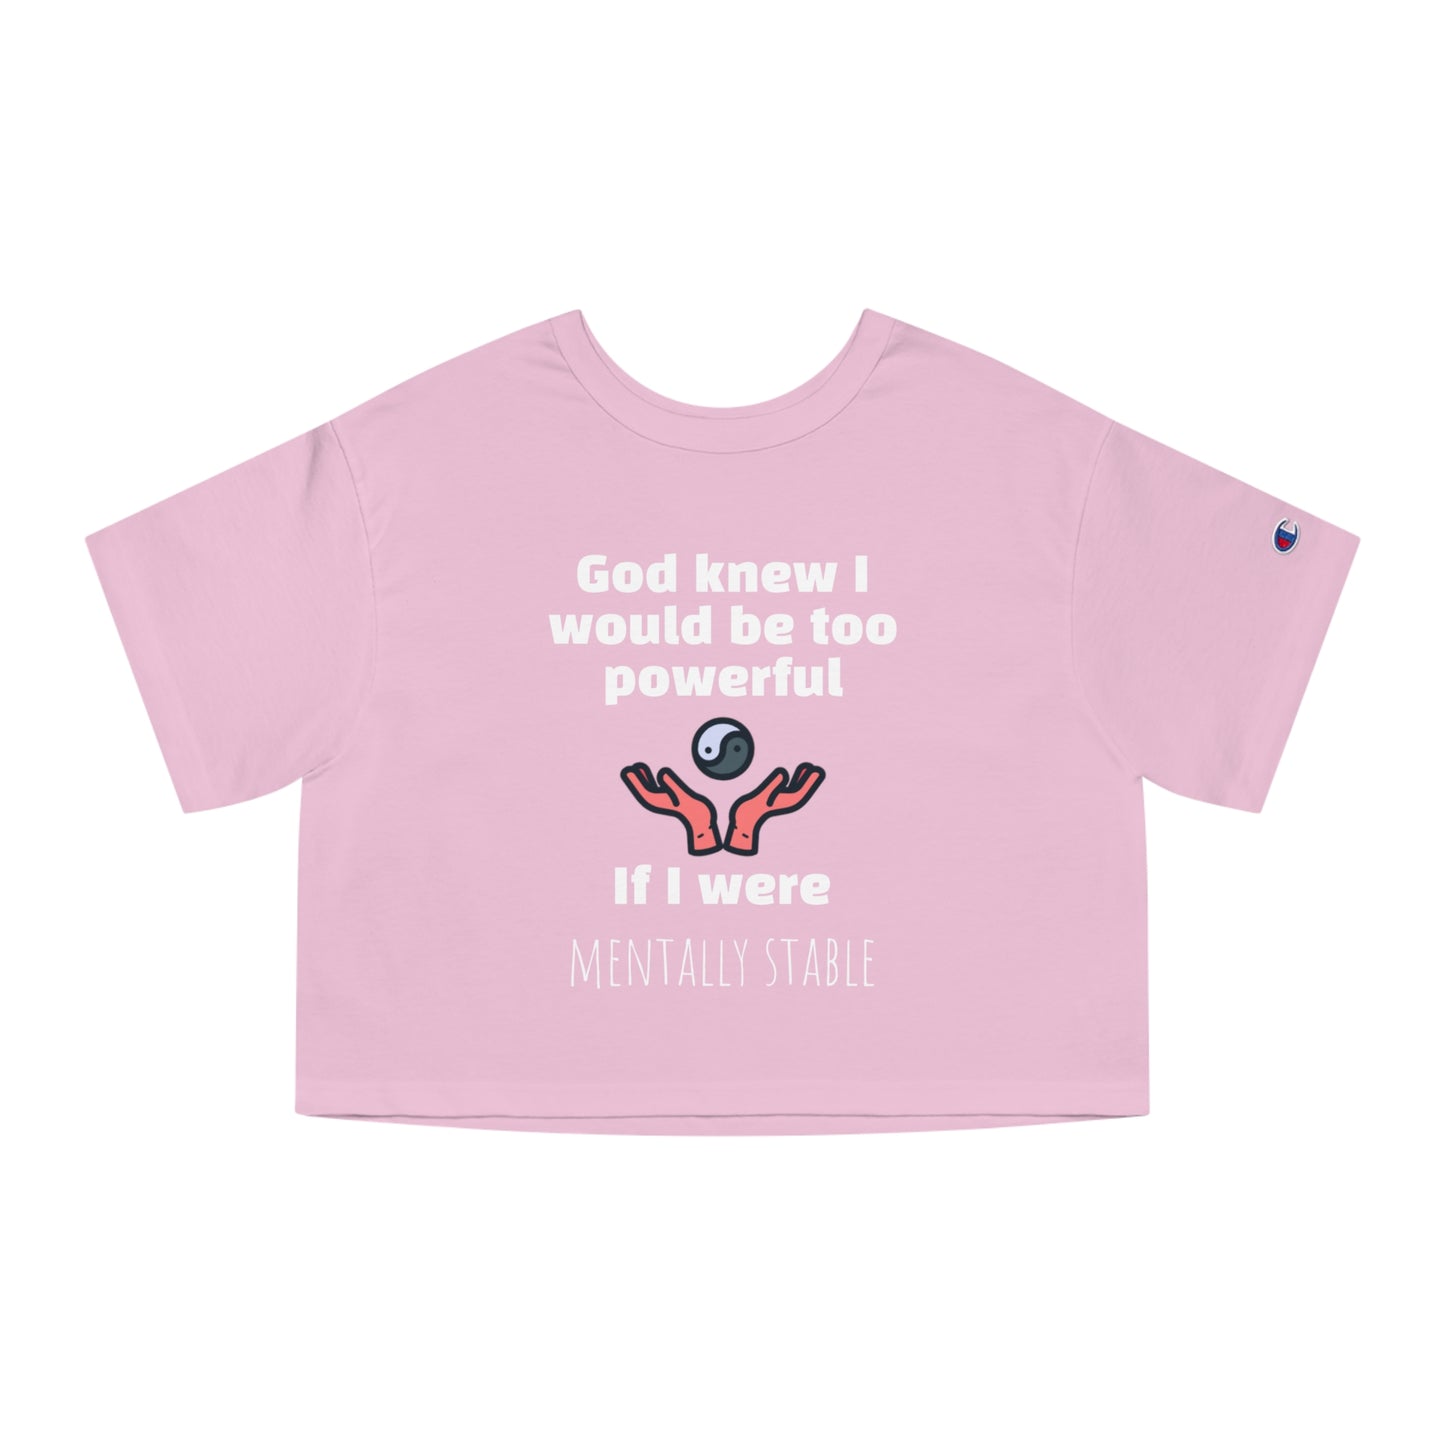 "God knew I would be too powerful if I were mentally stable" - Champion™ crop top